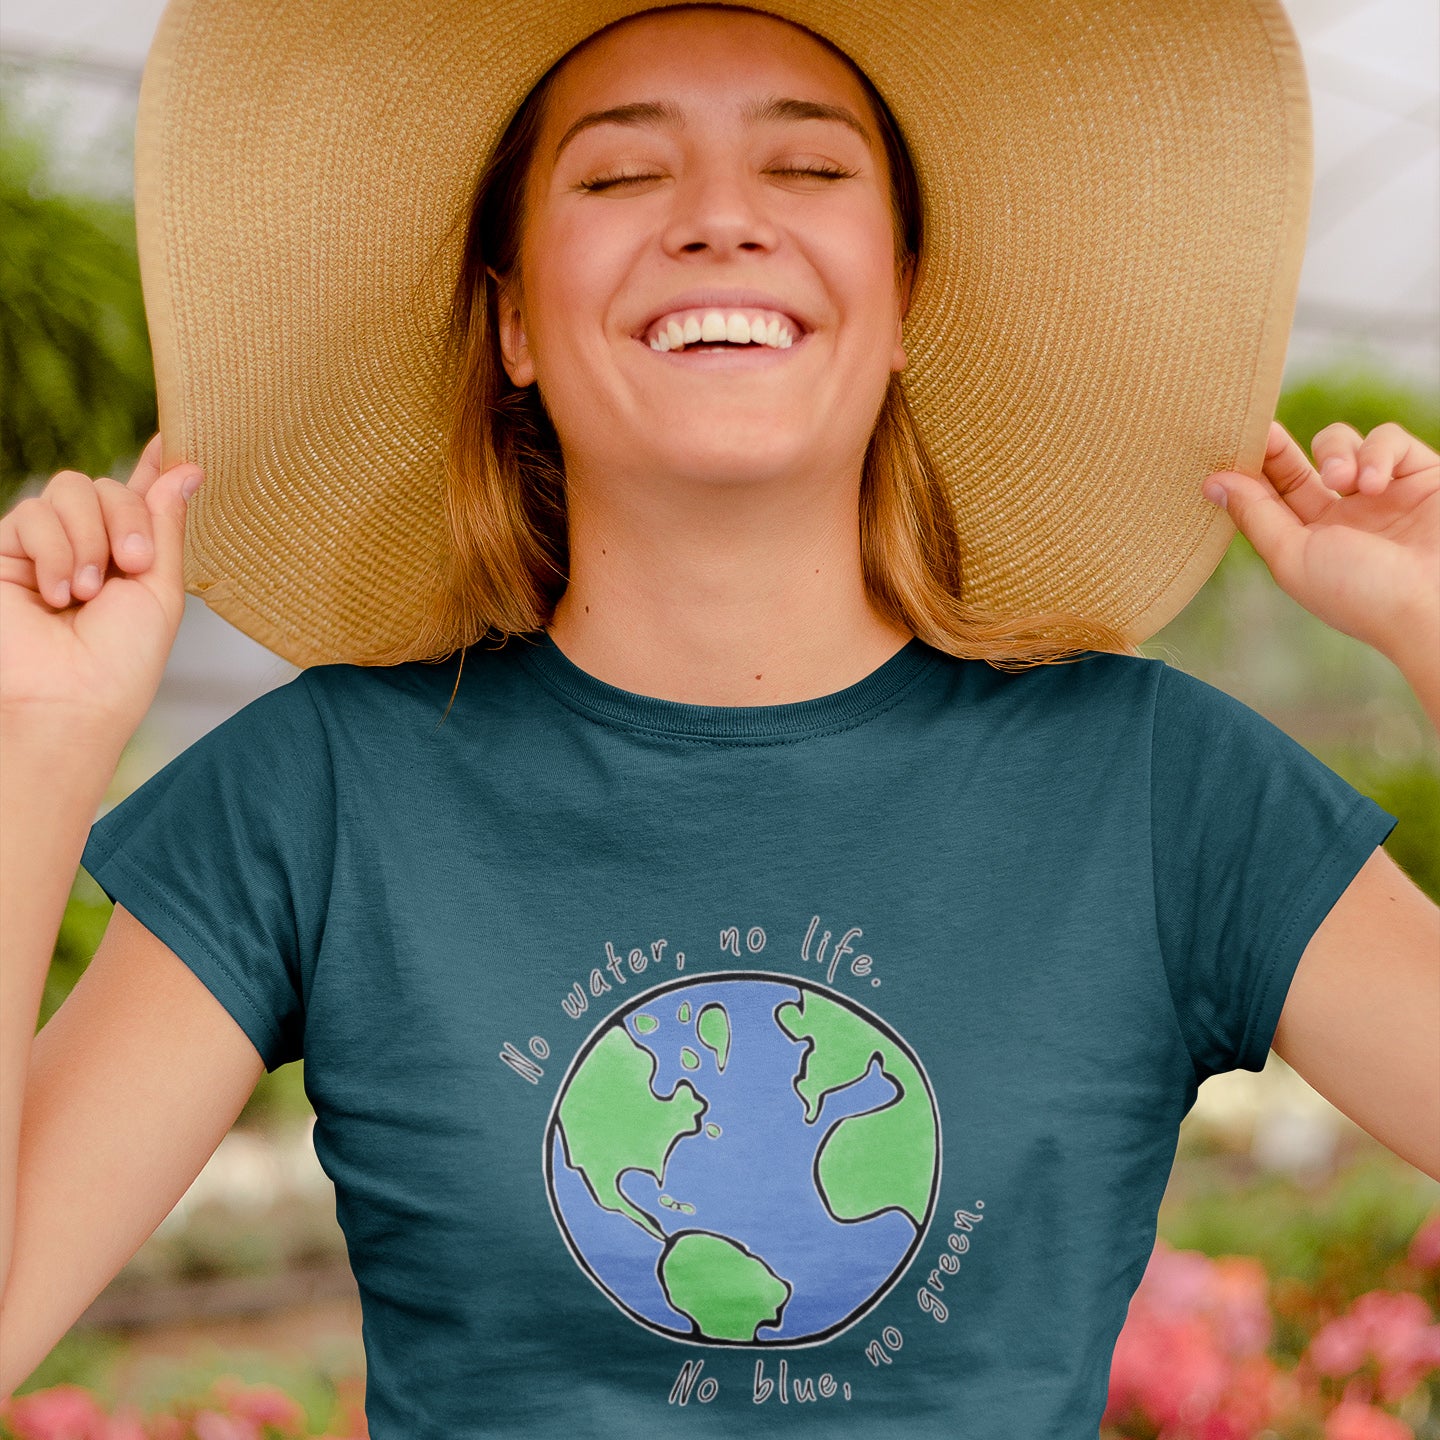 girl in greenhouse with flowers and sunhat wearing getpinkfit "No Blue No Green" tshirt - 10% of profits give back to non-profit organizations - ethically and sustainably made clothing